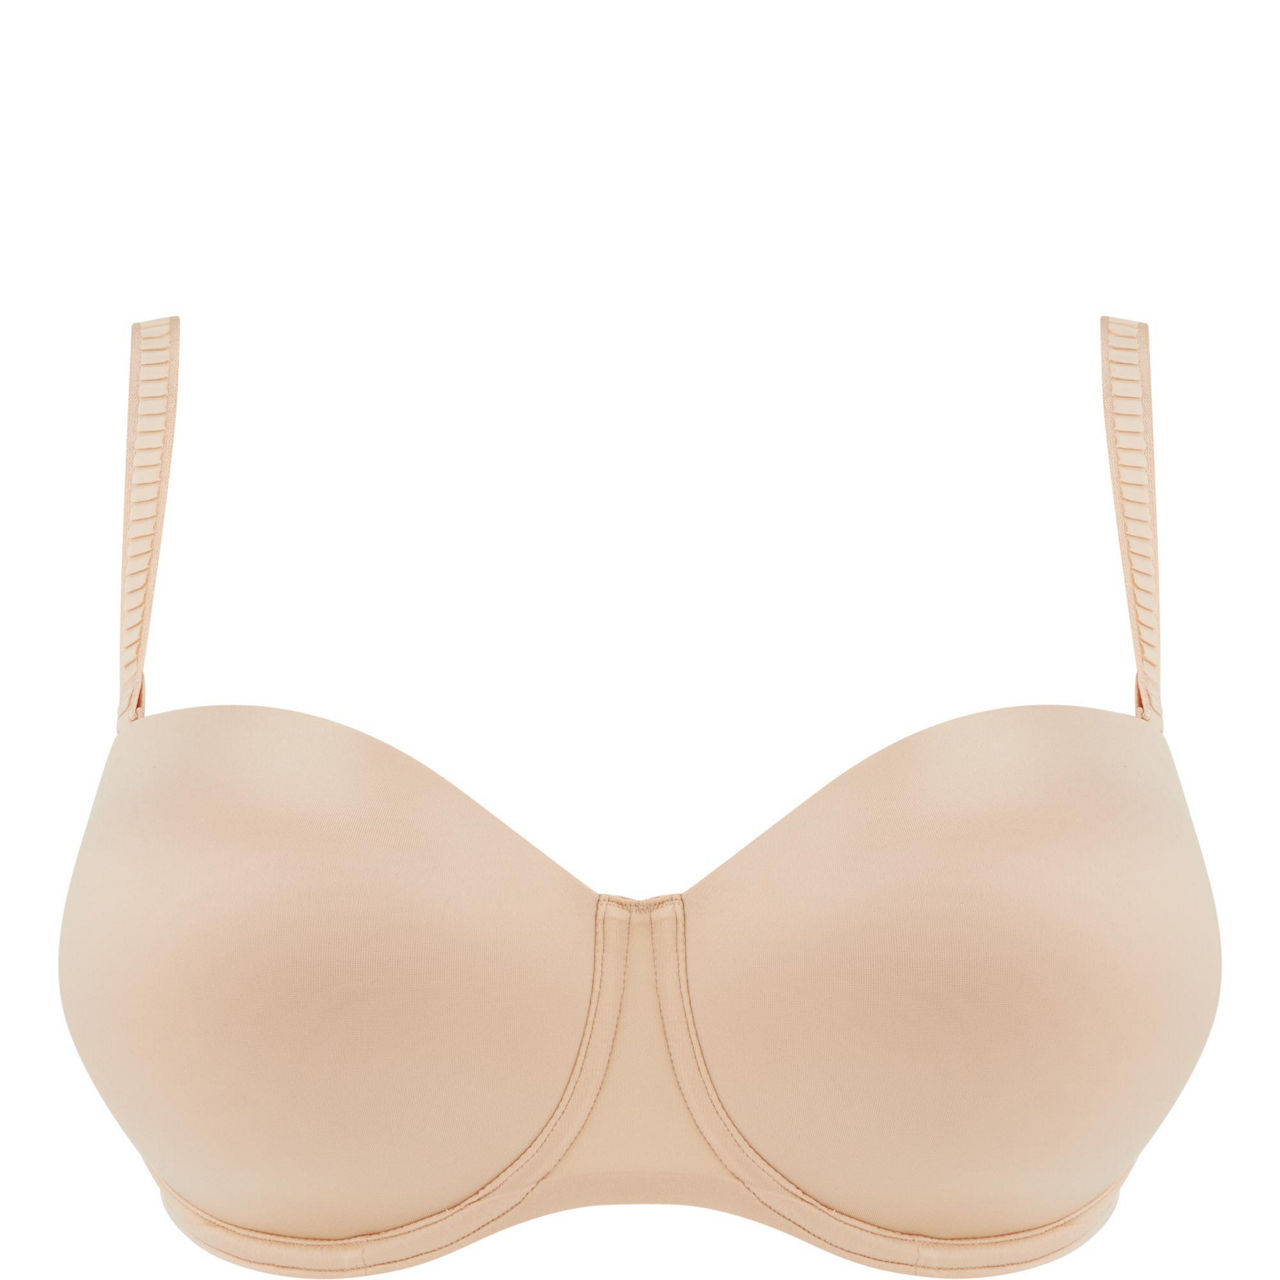 Straps Showing? Choosing the Right Bra for Your Halter Top - Miele